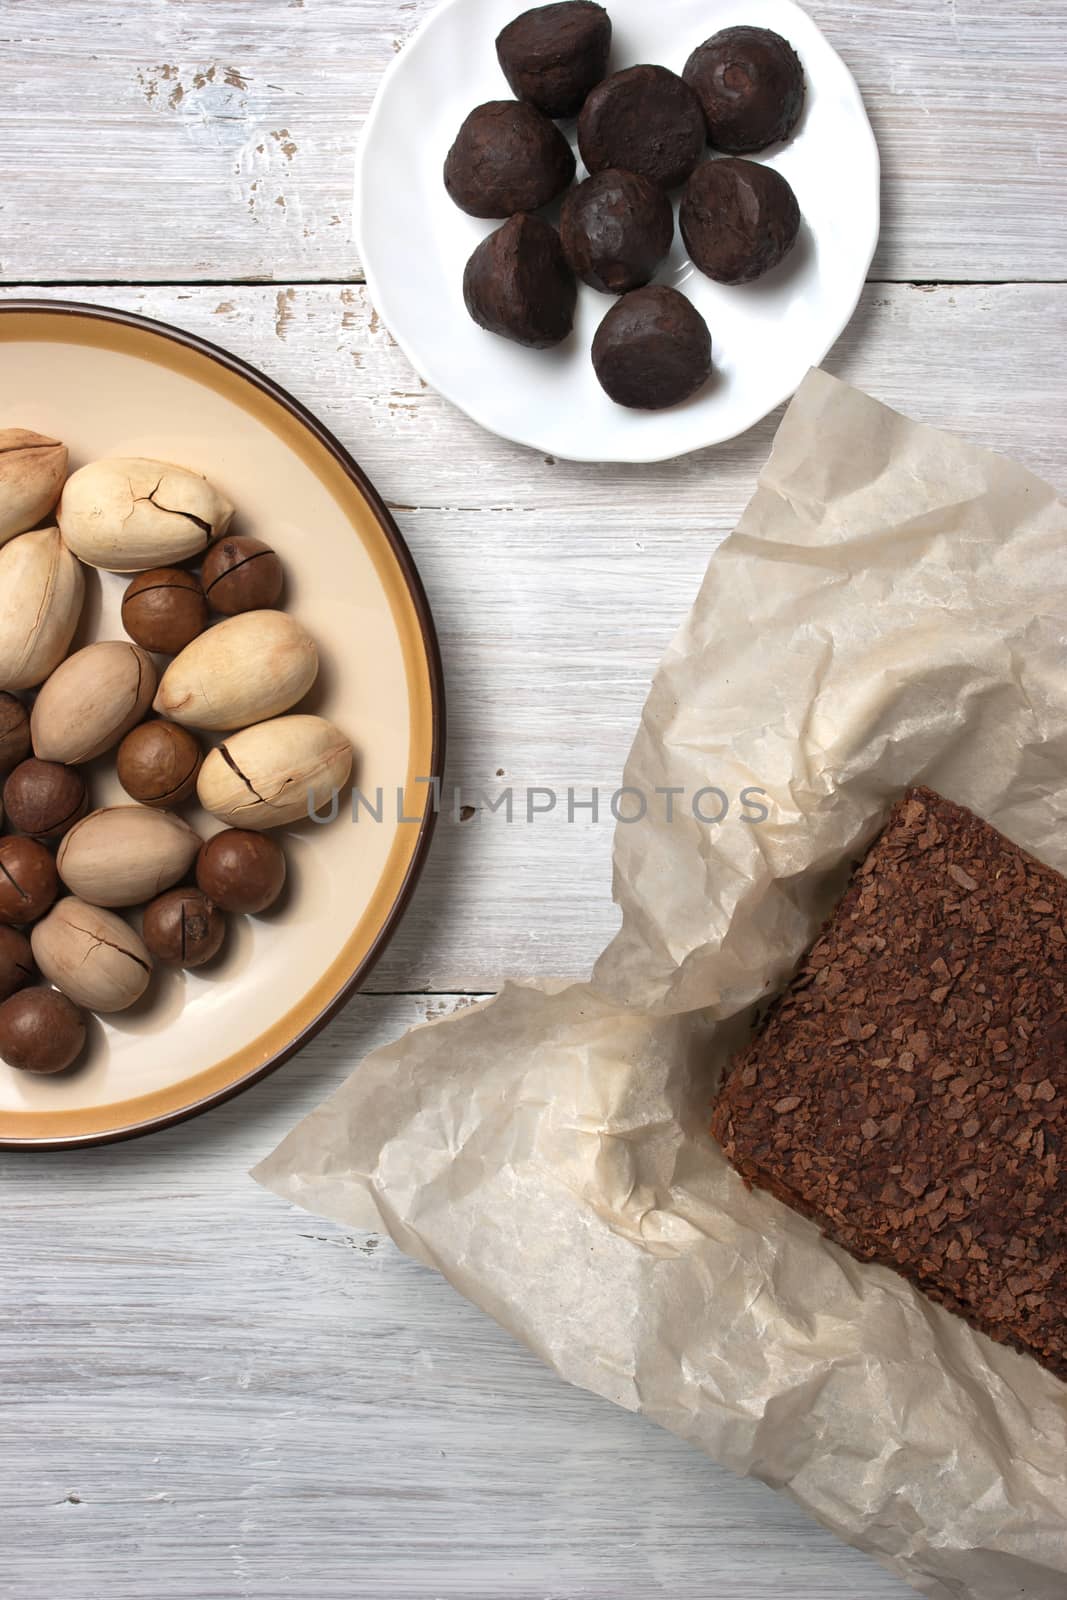 Nuts, truffle candy and chocolate cake on the white wooden table vertical